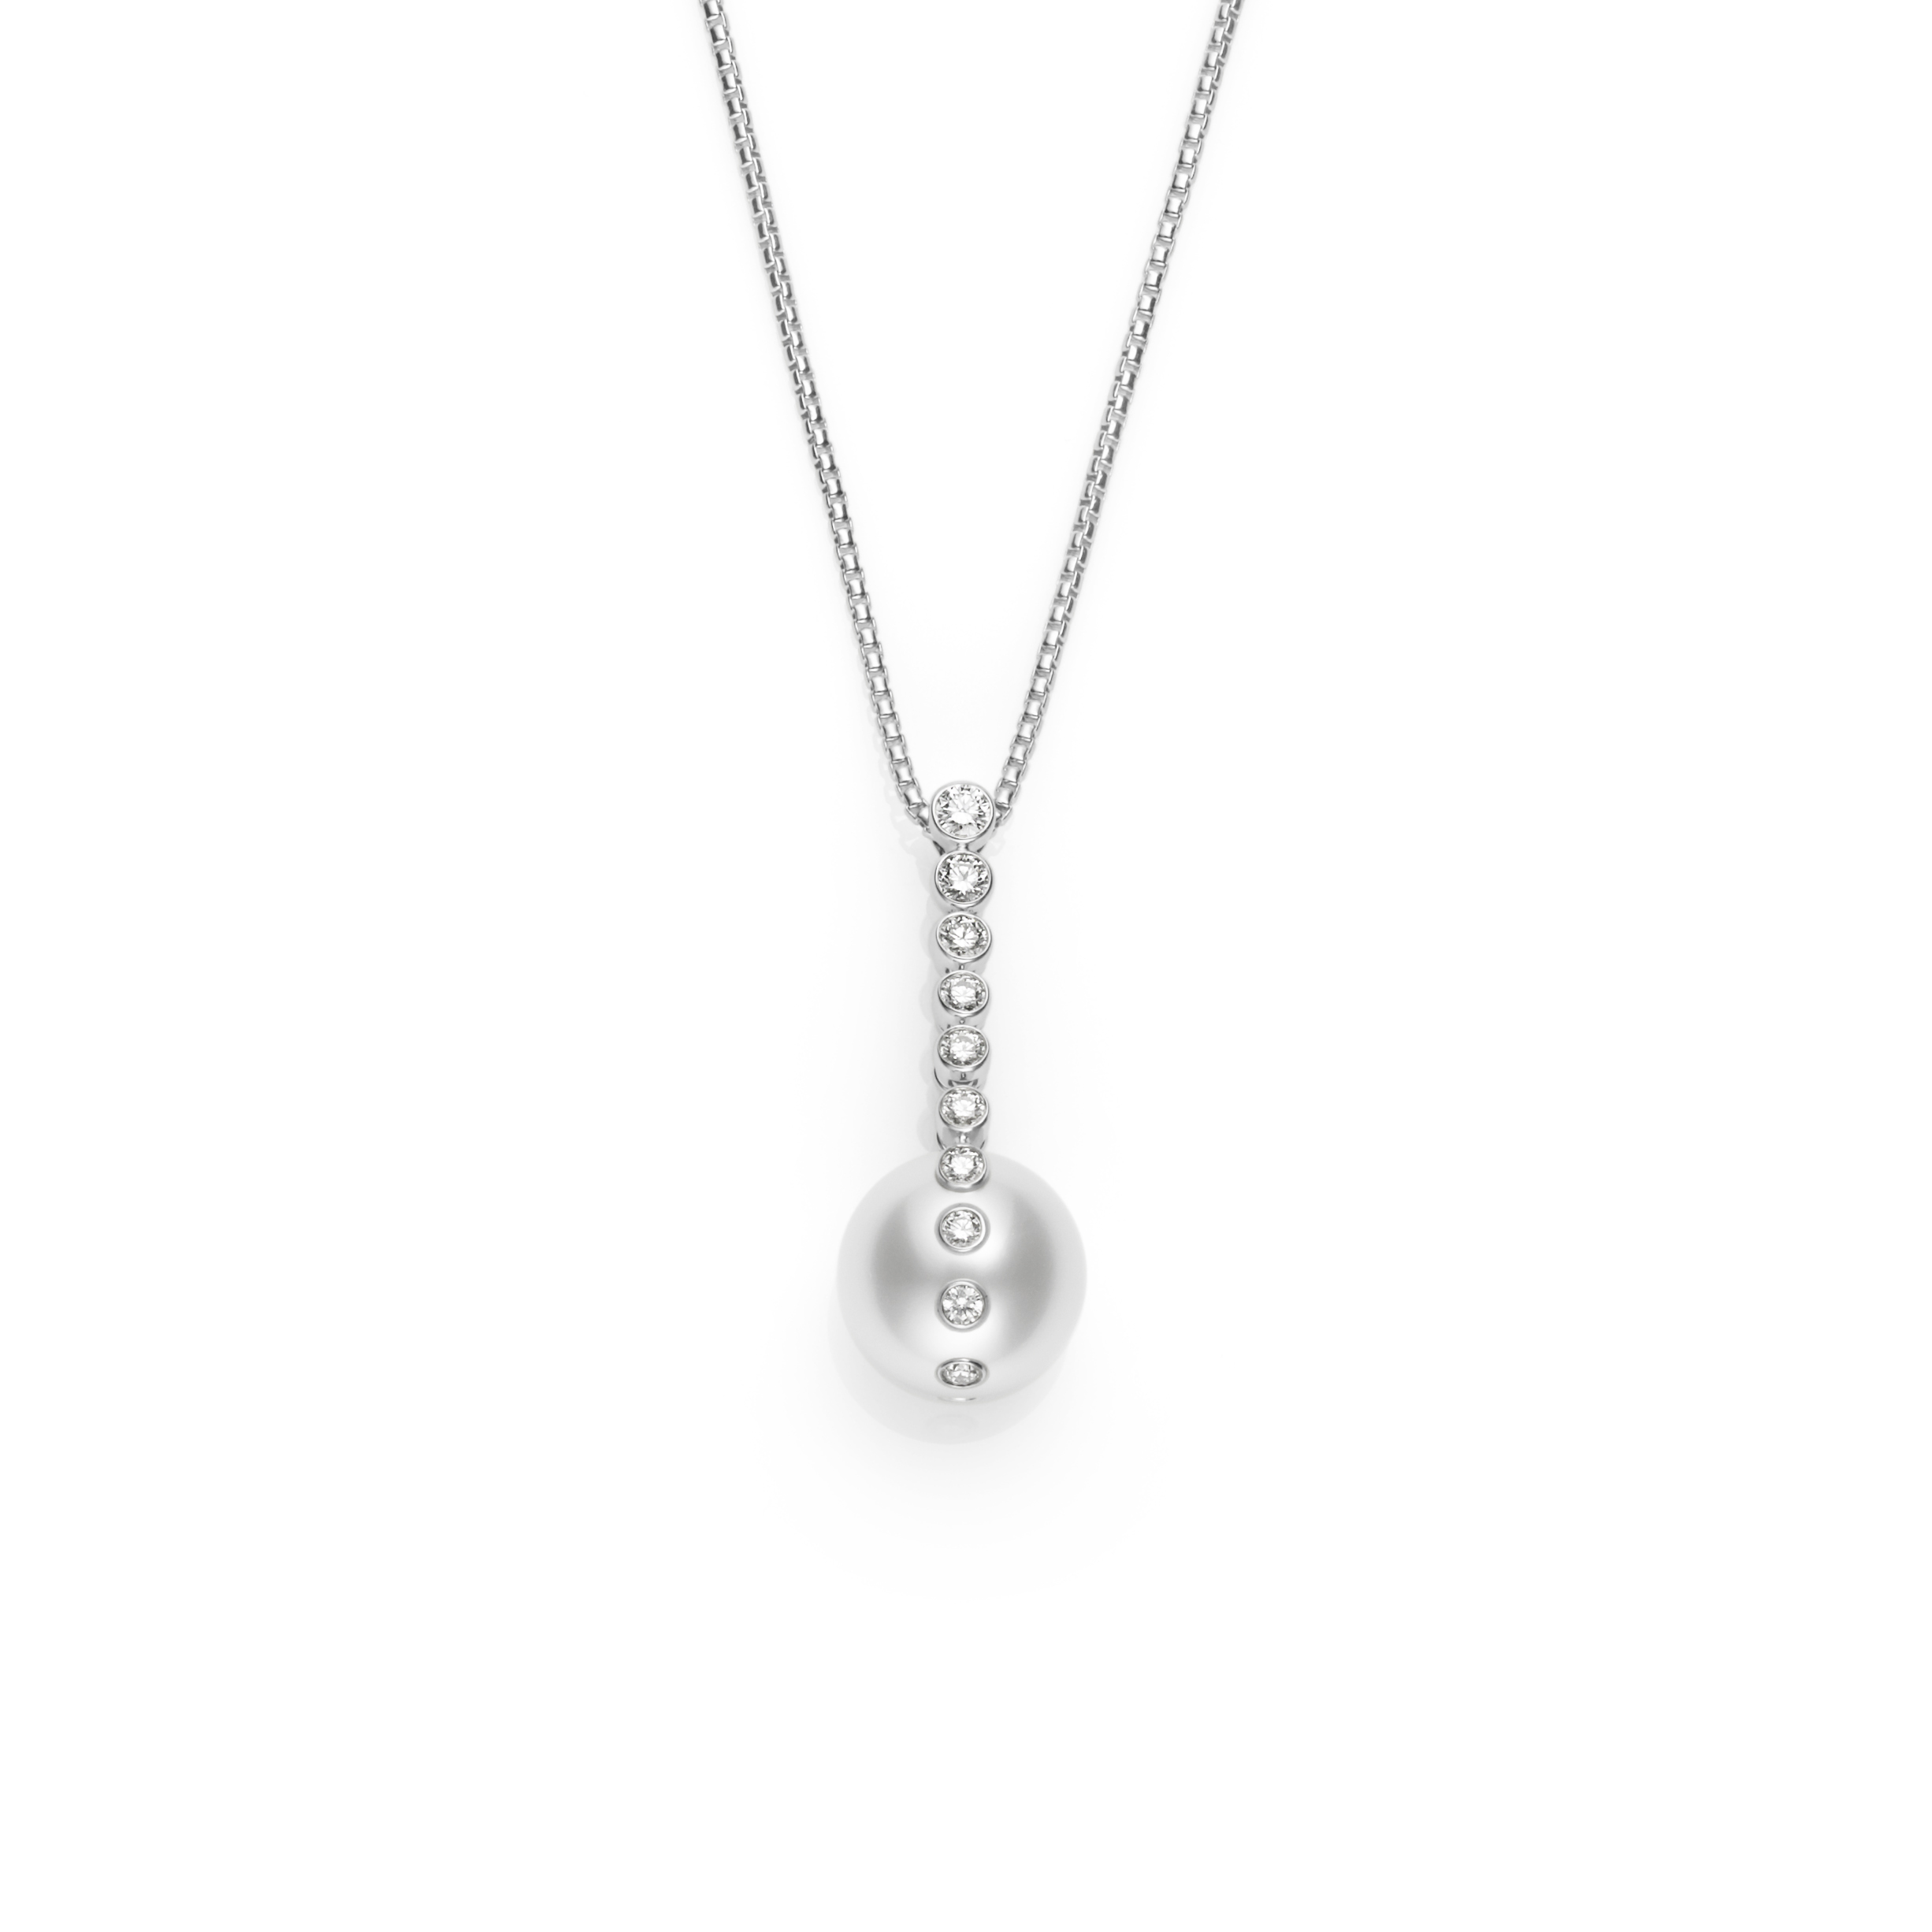 This necklace by Mikimoto is crafted from 18k white gold and features a 13mm white pearl and 0.70 total carats of diamonds.